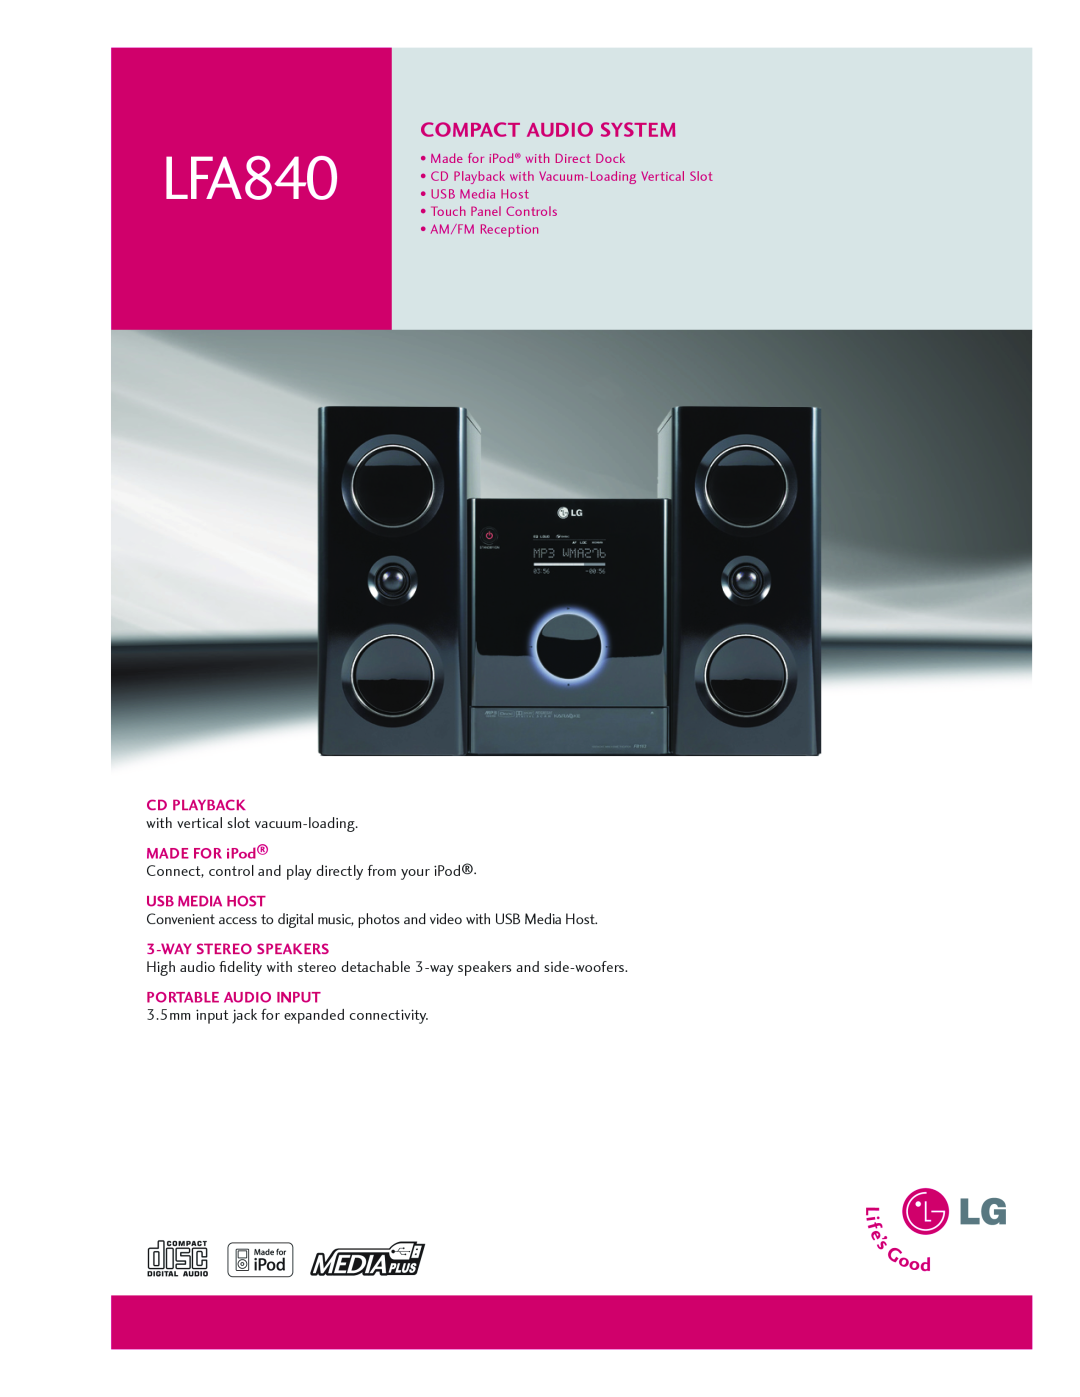 LG Electronics LFA840 manual COMPACT Audio System, CD Playback, Made for iPod, Usb Media Host, Waystereo Speakers 